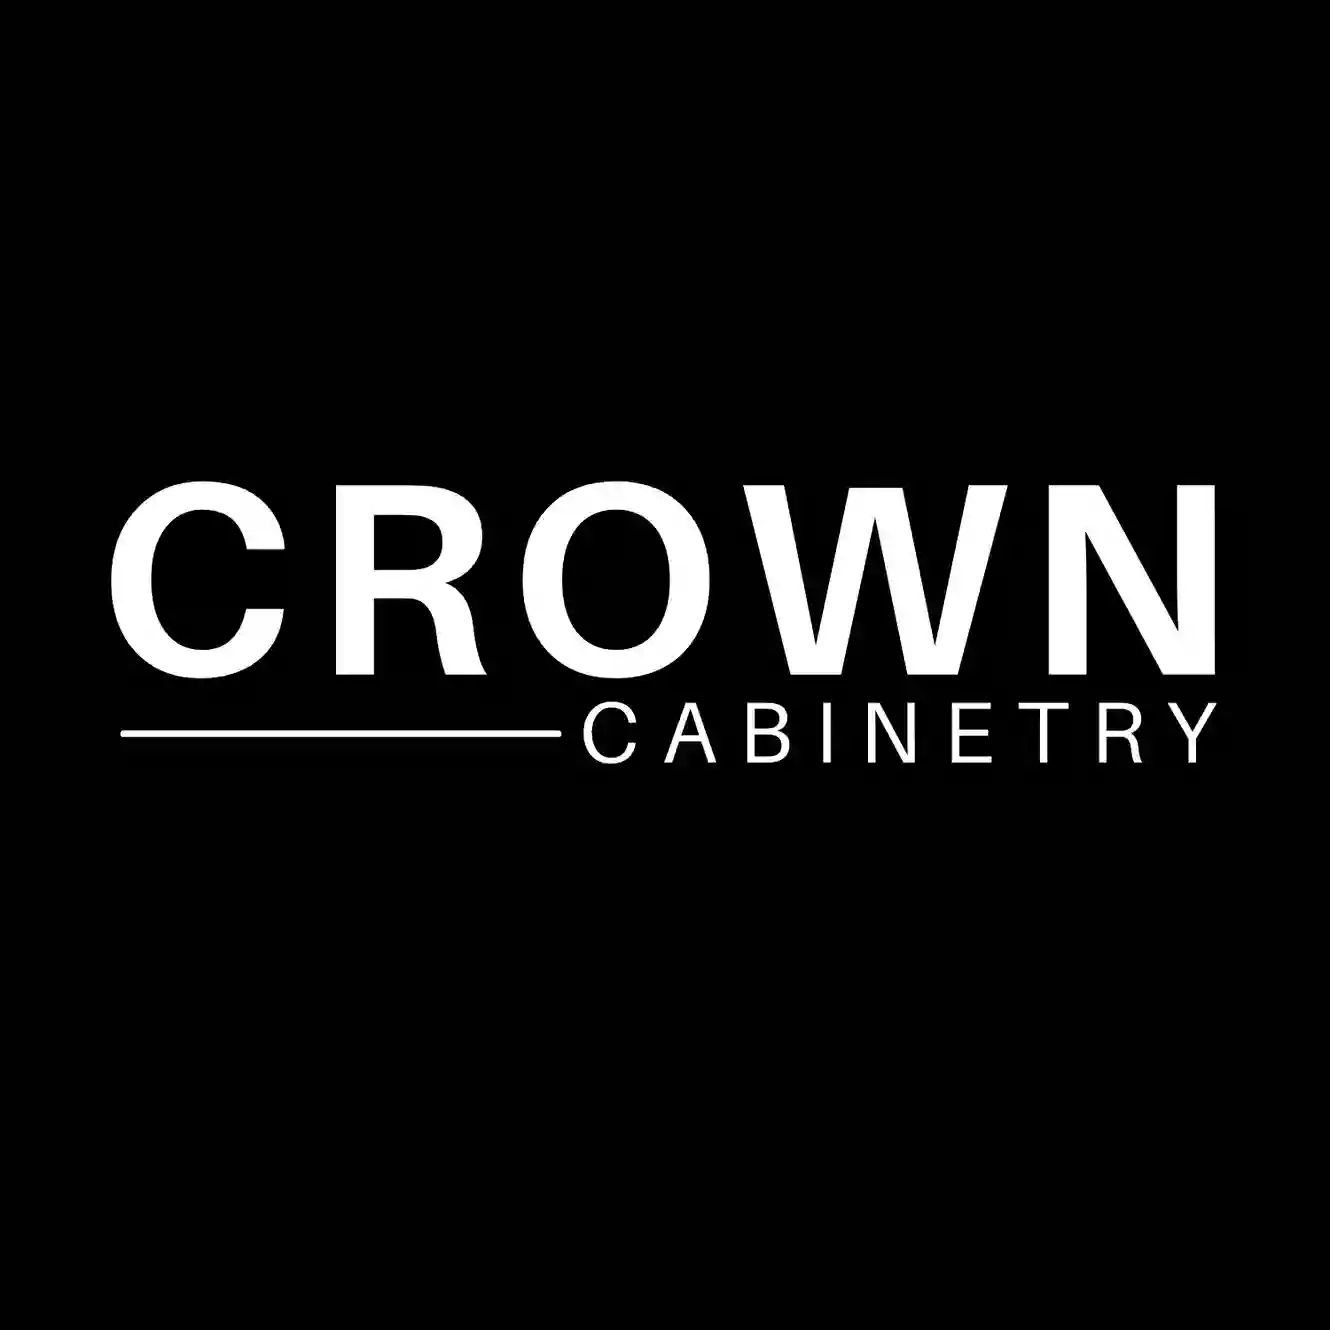 Crown Cabinetry